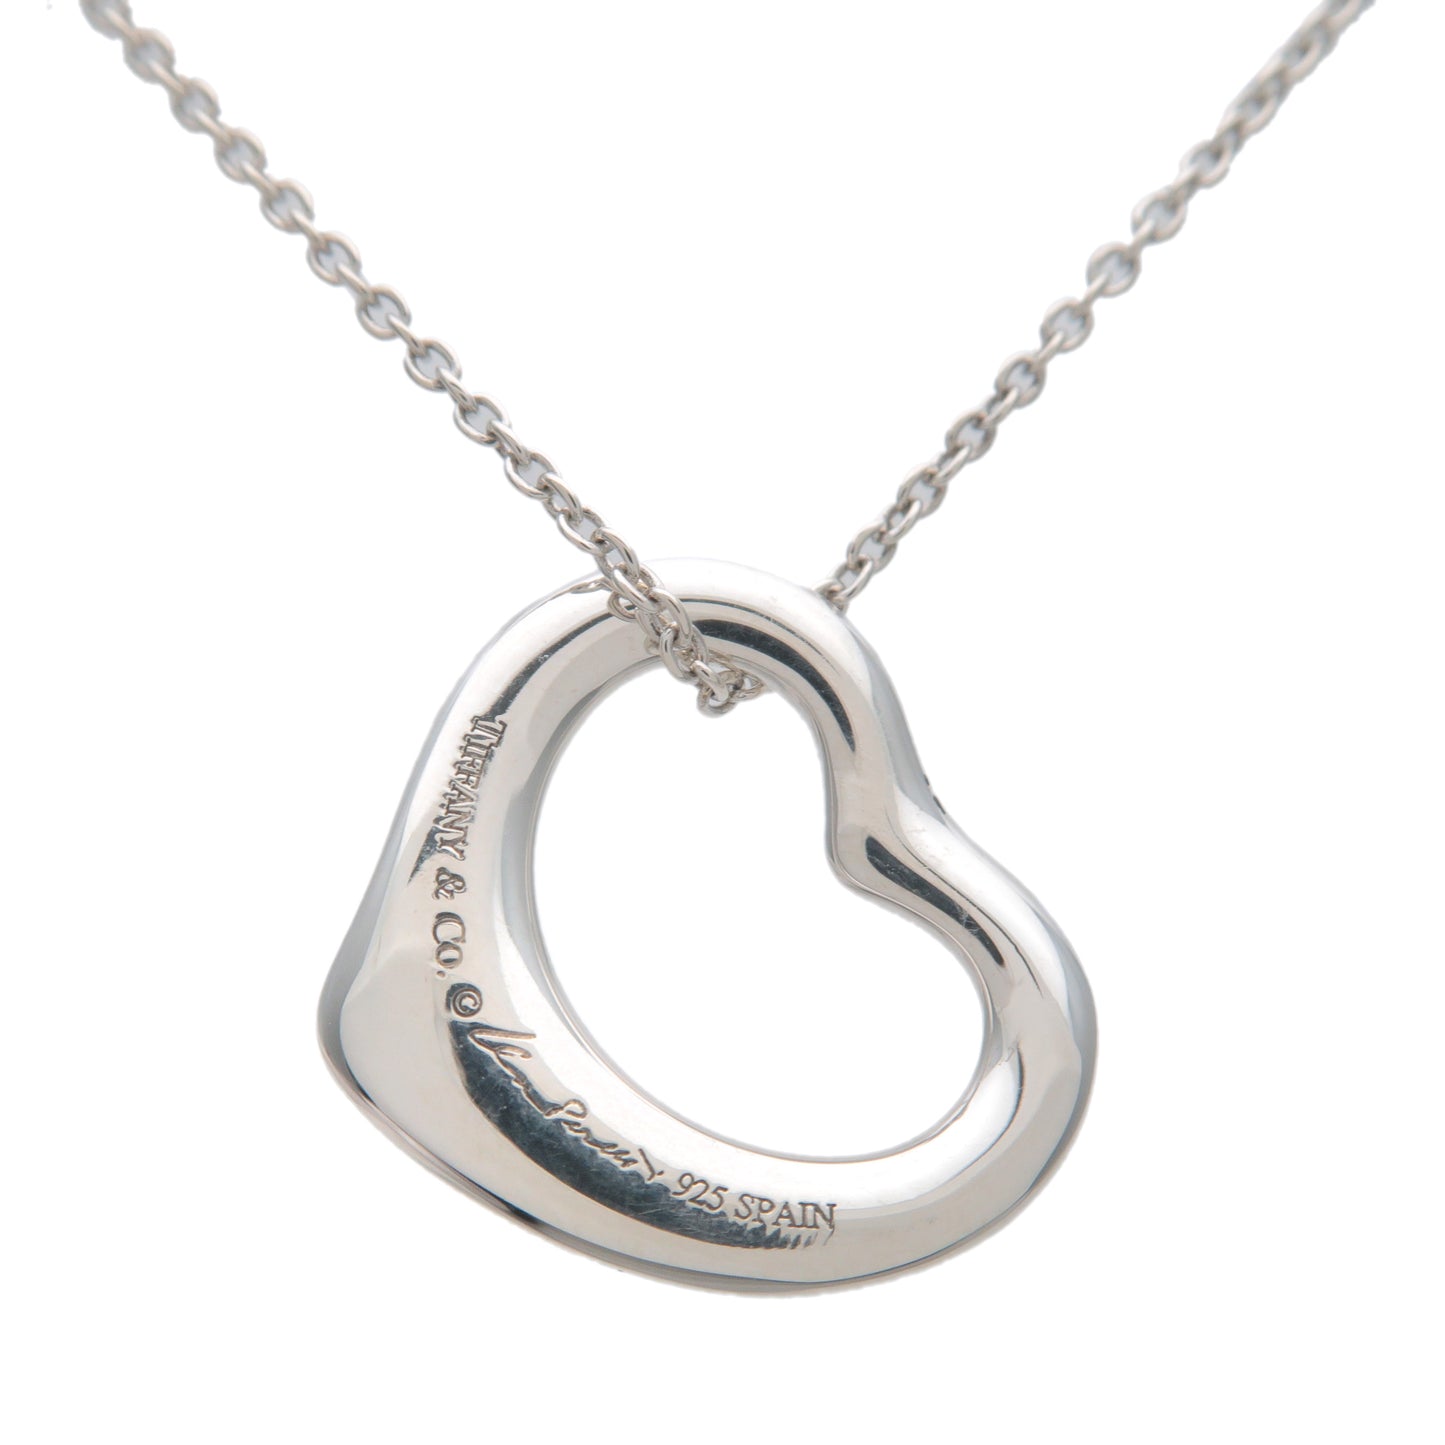 Tiffany&Co. Open Heart Necklace Small SV925 Silver